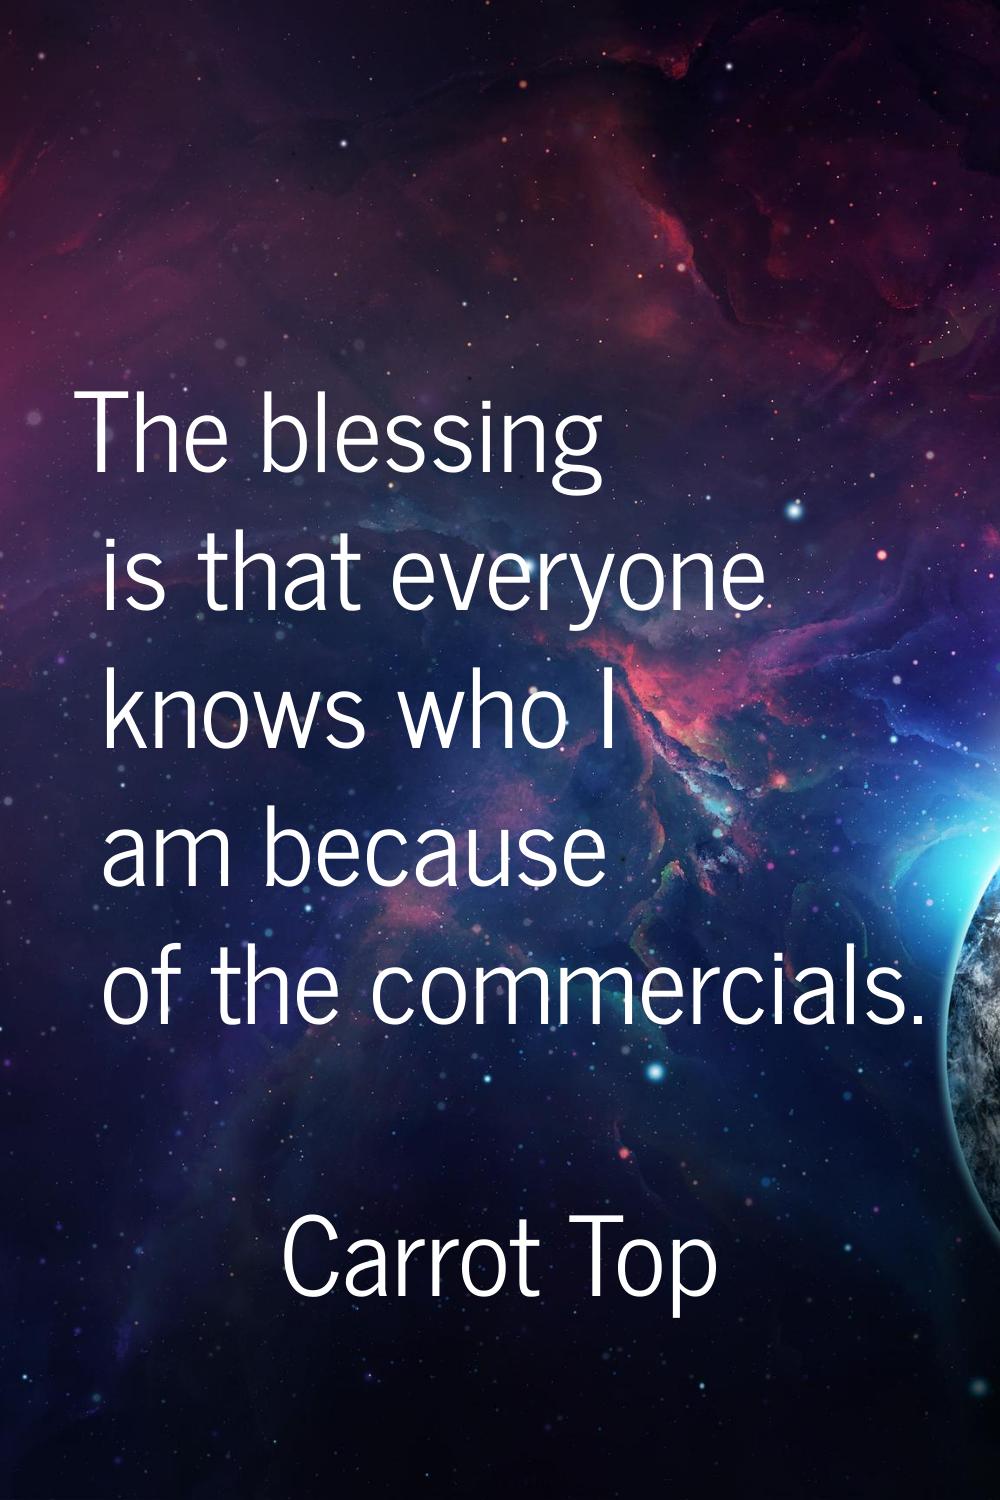 The blessing is that everyone knows who I am because of the commercials.